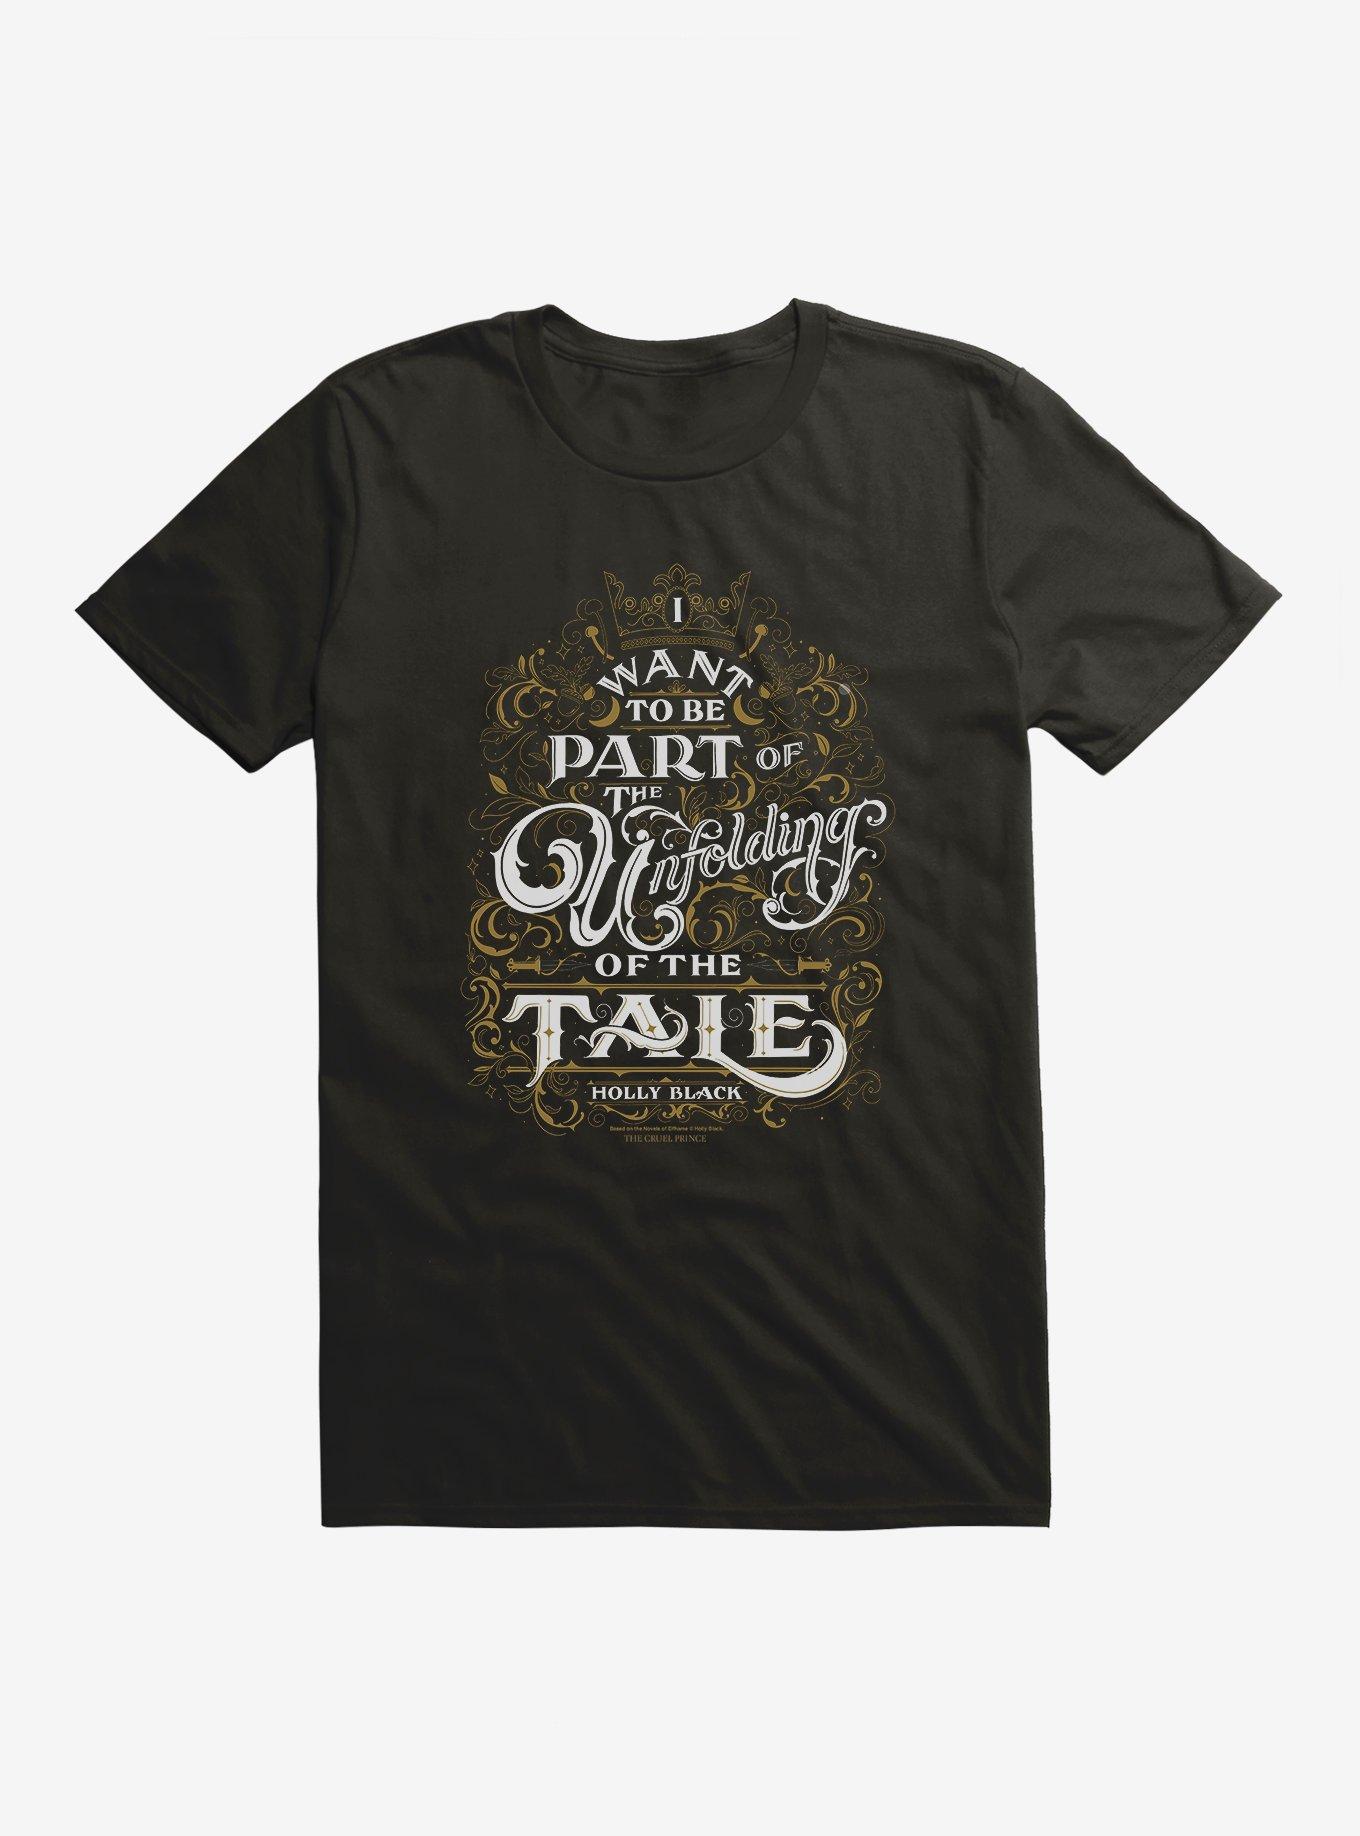 The Cruel Prince Sinister Enchantment Collection: Unfolding Of Tale T-Shirt